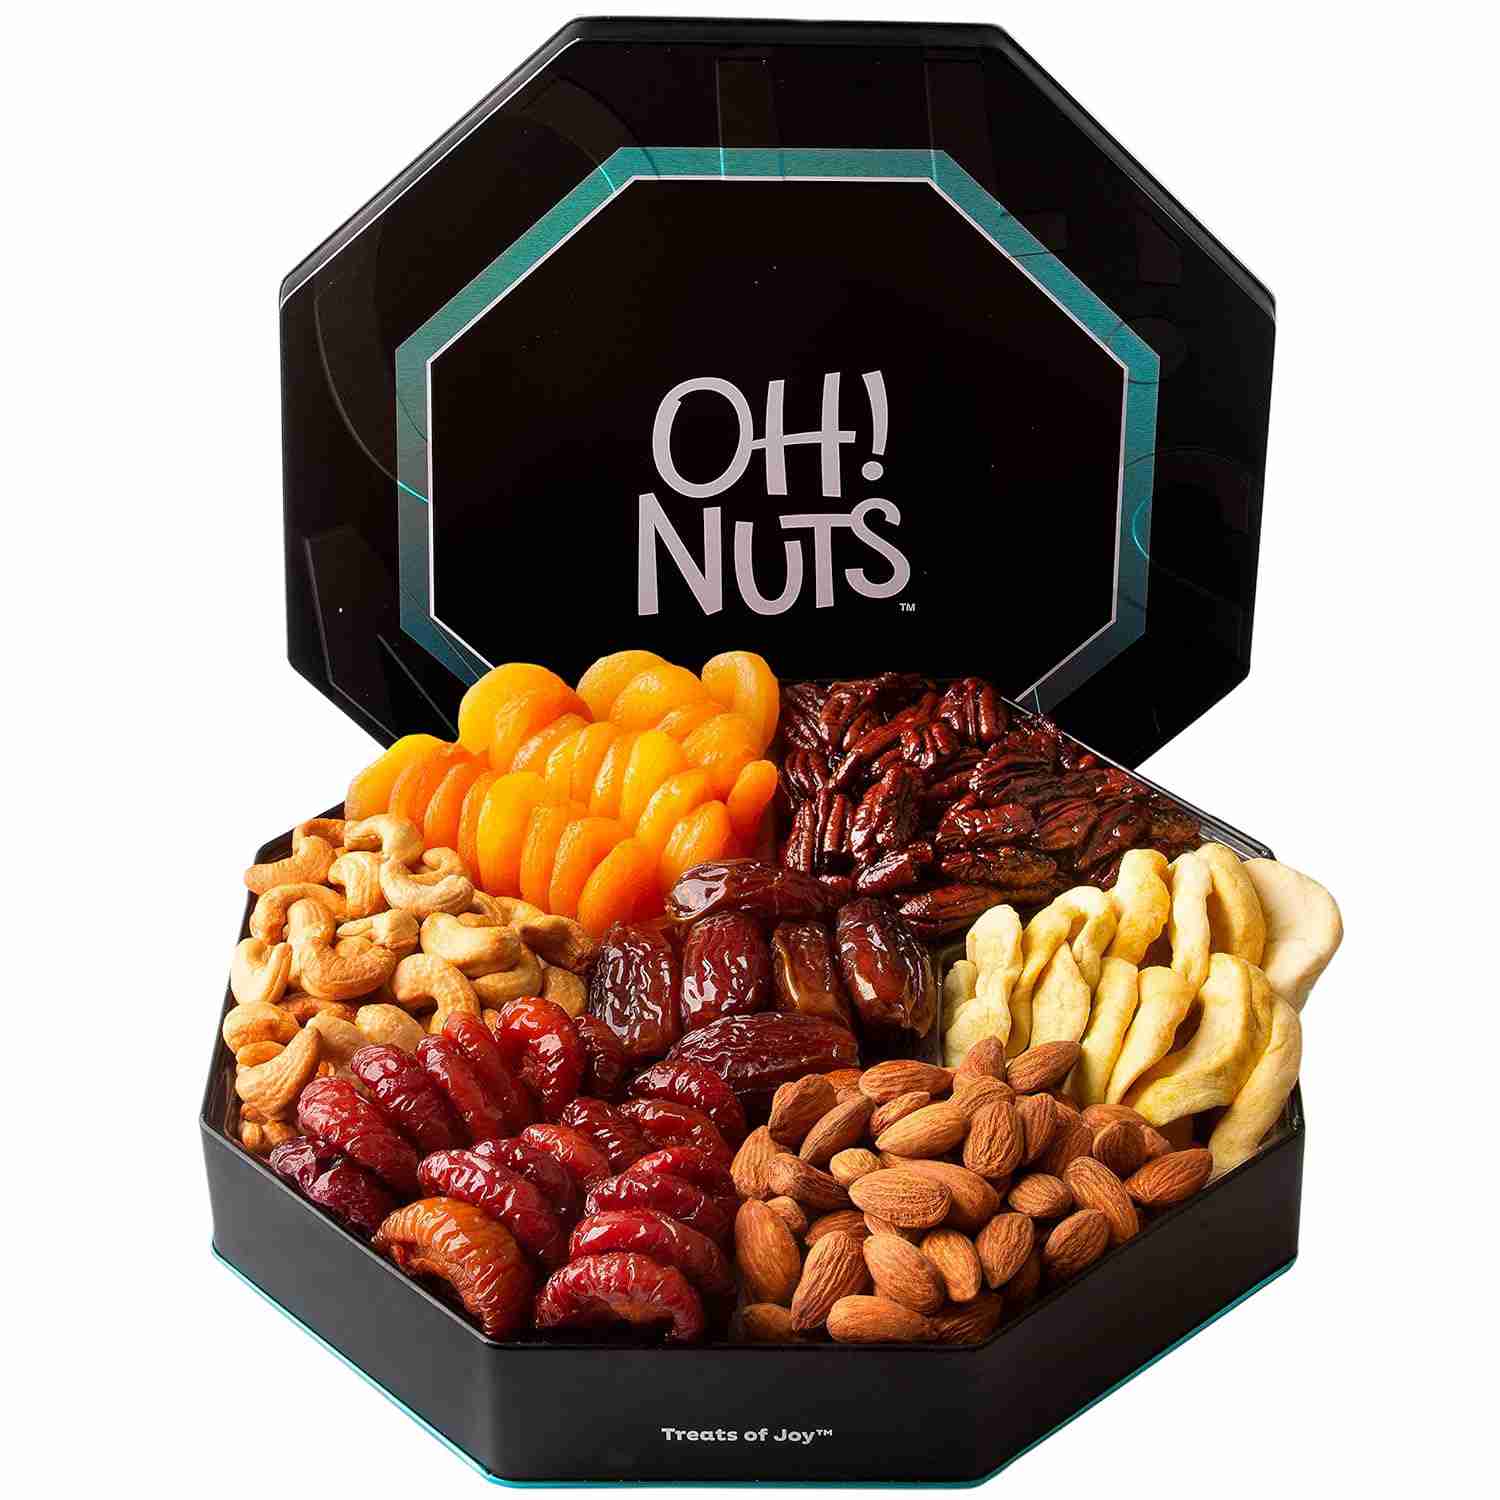 dry-fruits-and-nuts-gift-box with cash back rebate